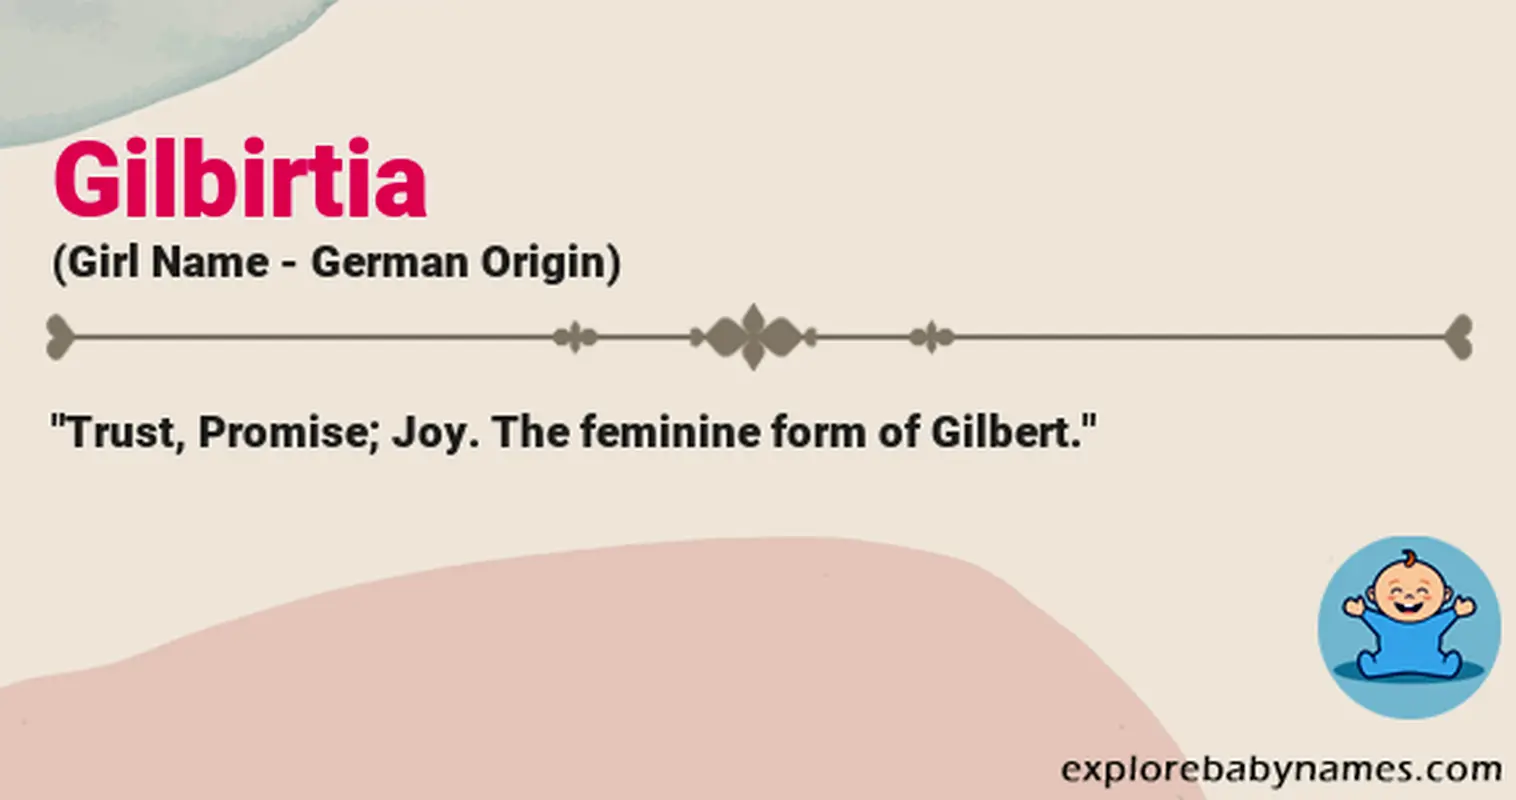 Meaning of Gilbirtia